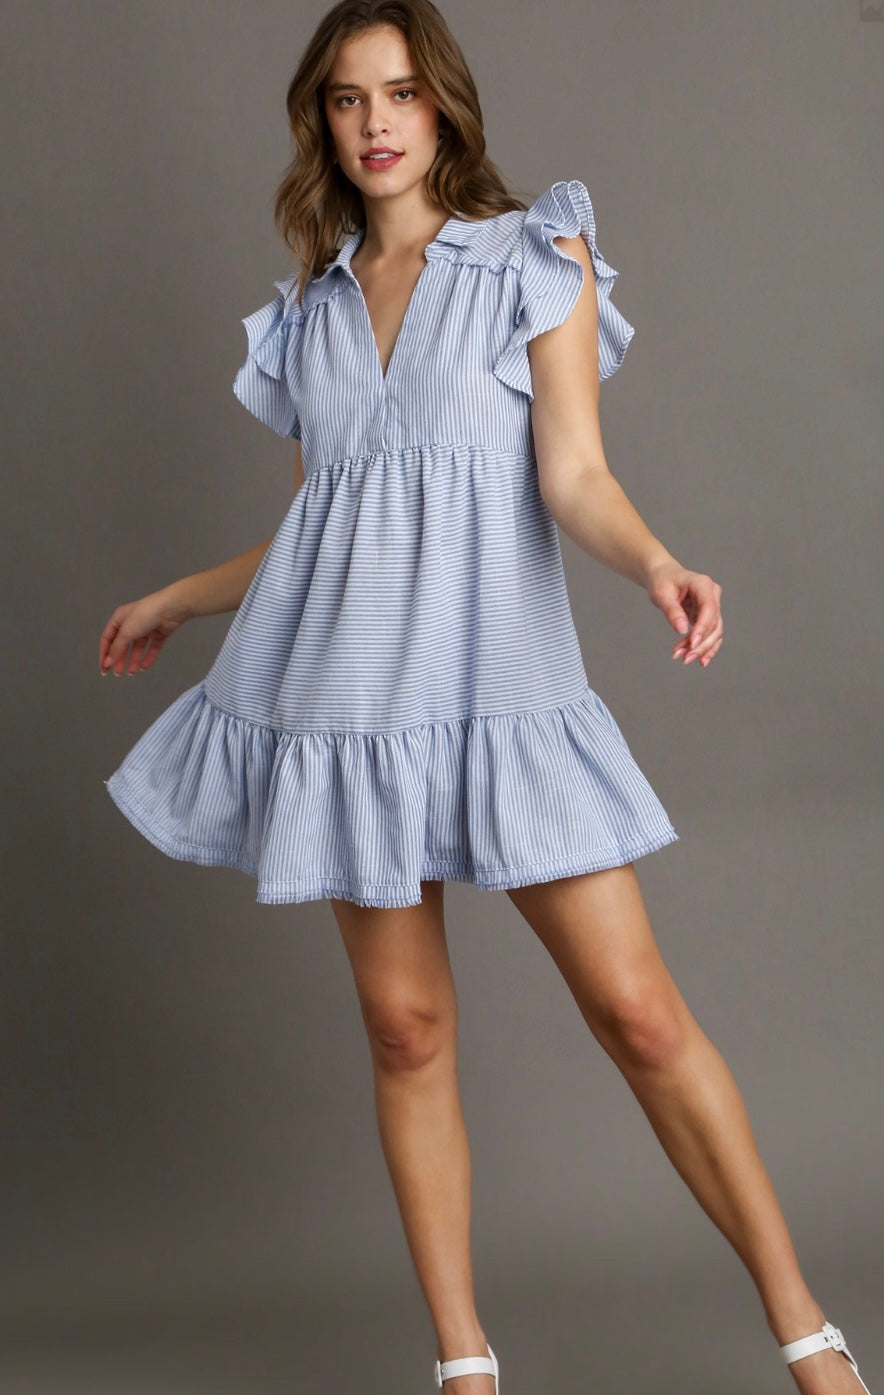 V-Neck Collared Dress with Ruffle Sleeves and Fray Details